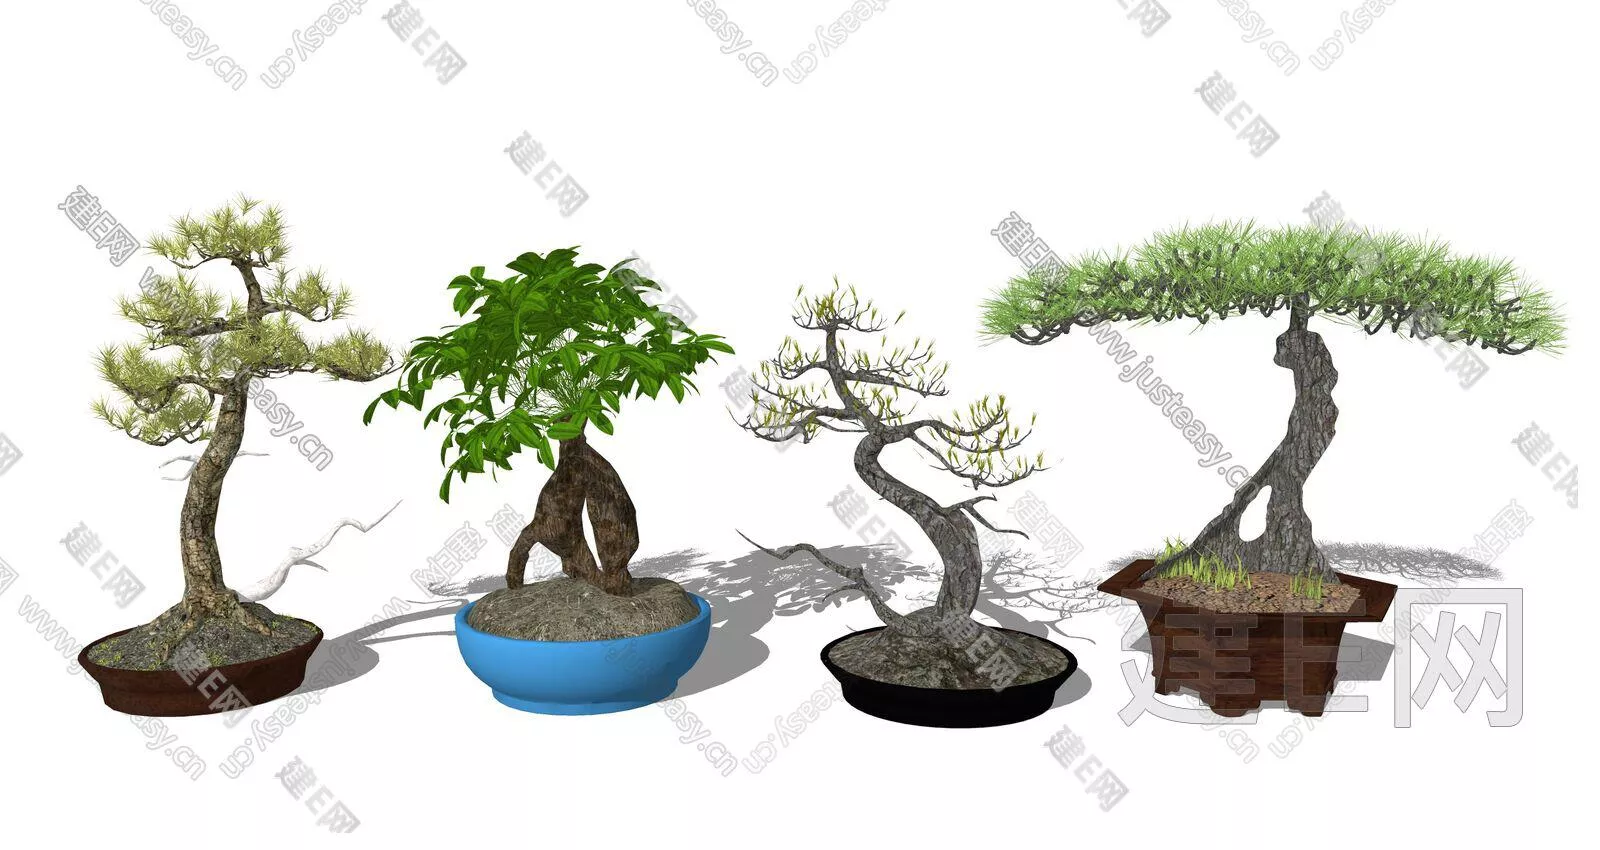 CHINESE POTTED PLANT - SKETCHUP 3D MODEL - ENSCAPE - 112673192